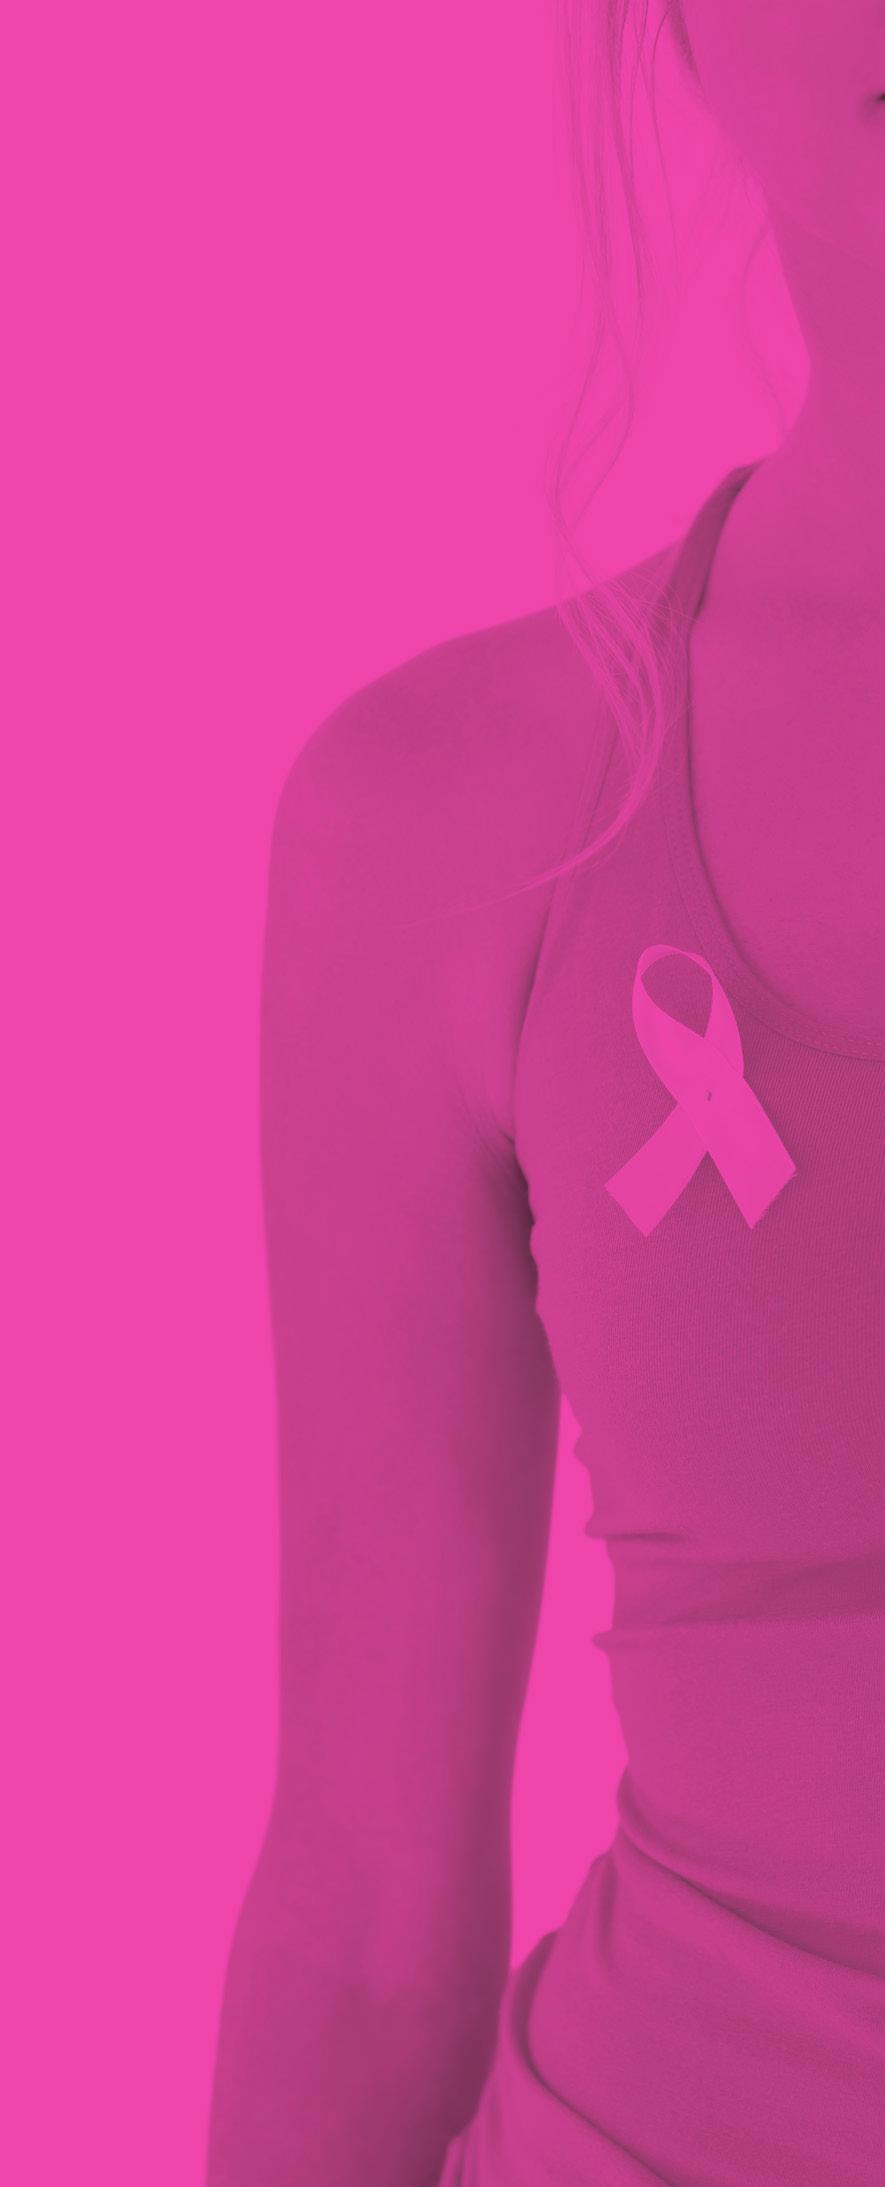 Has anyone in your immediate family had breast cancer? Next, think about your lifestyle. Are you living like there s no tomorrow? Drinking heavily several nights a week? Smoking?